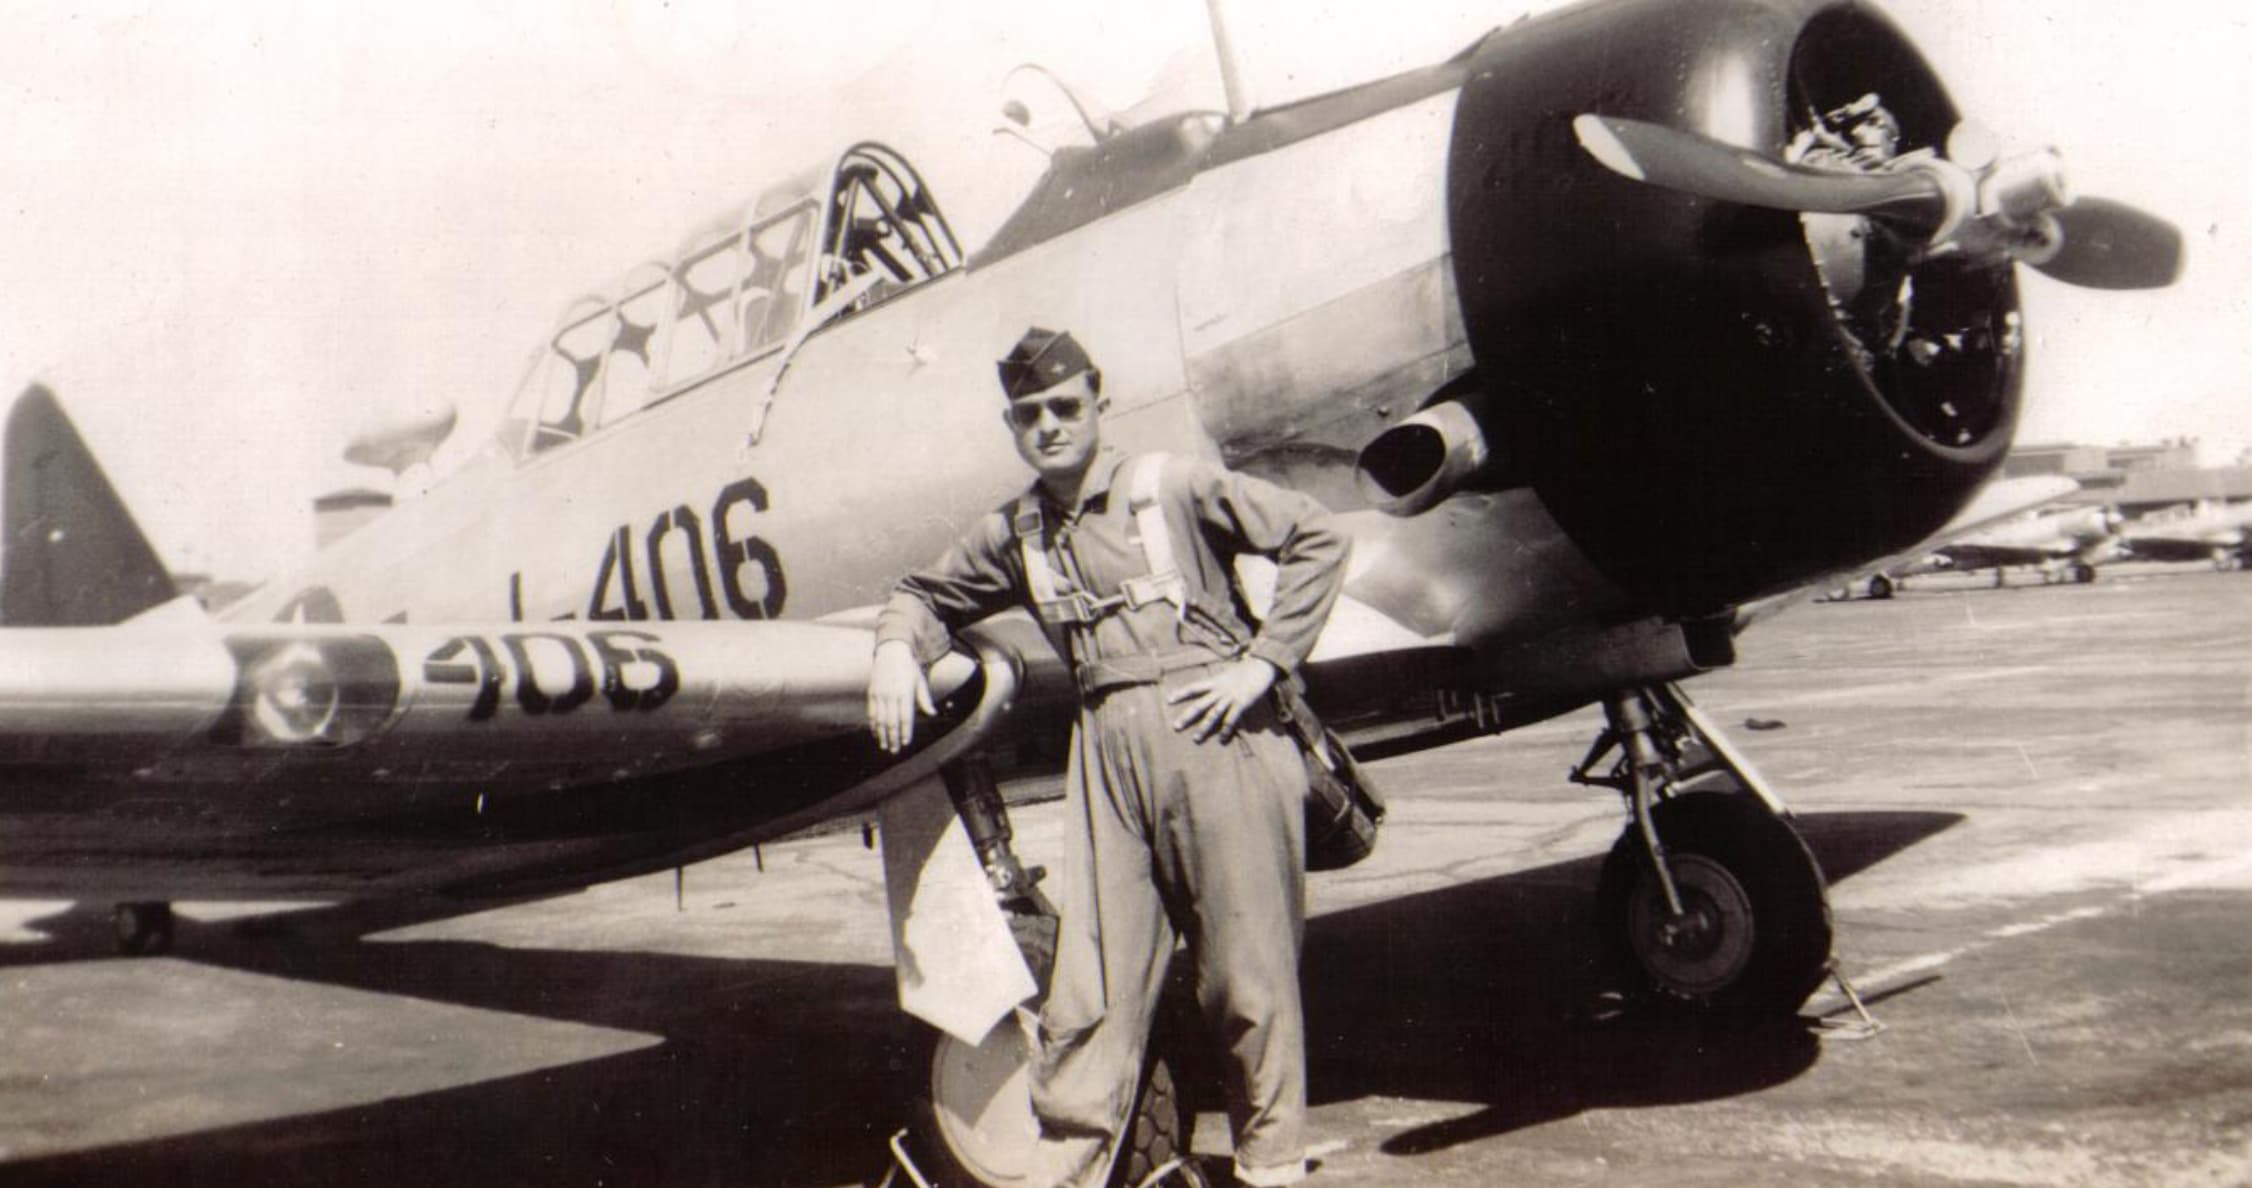 “T-6 Trainer my father flew in WW2 as part of his pilot training.”